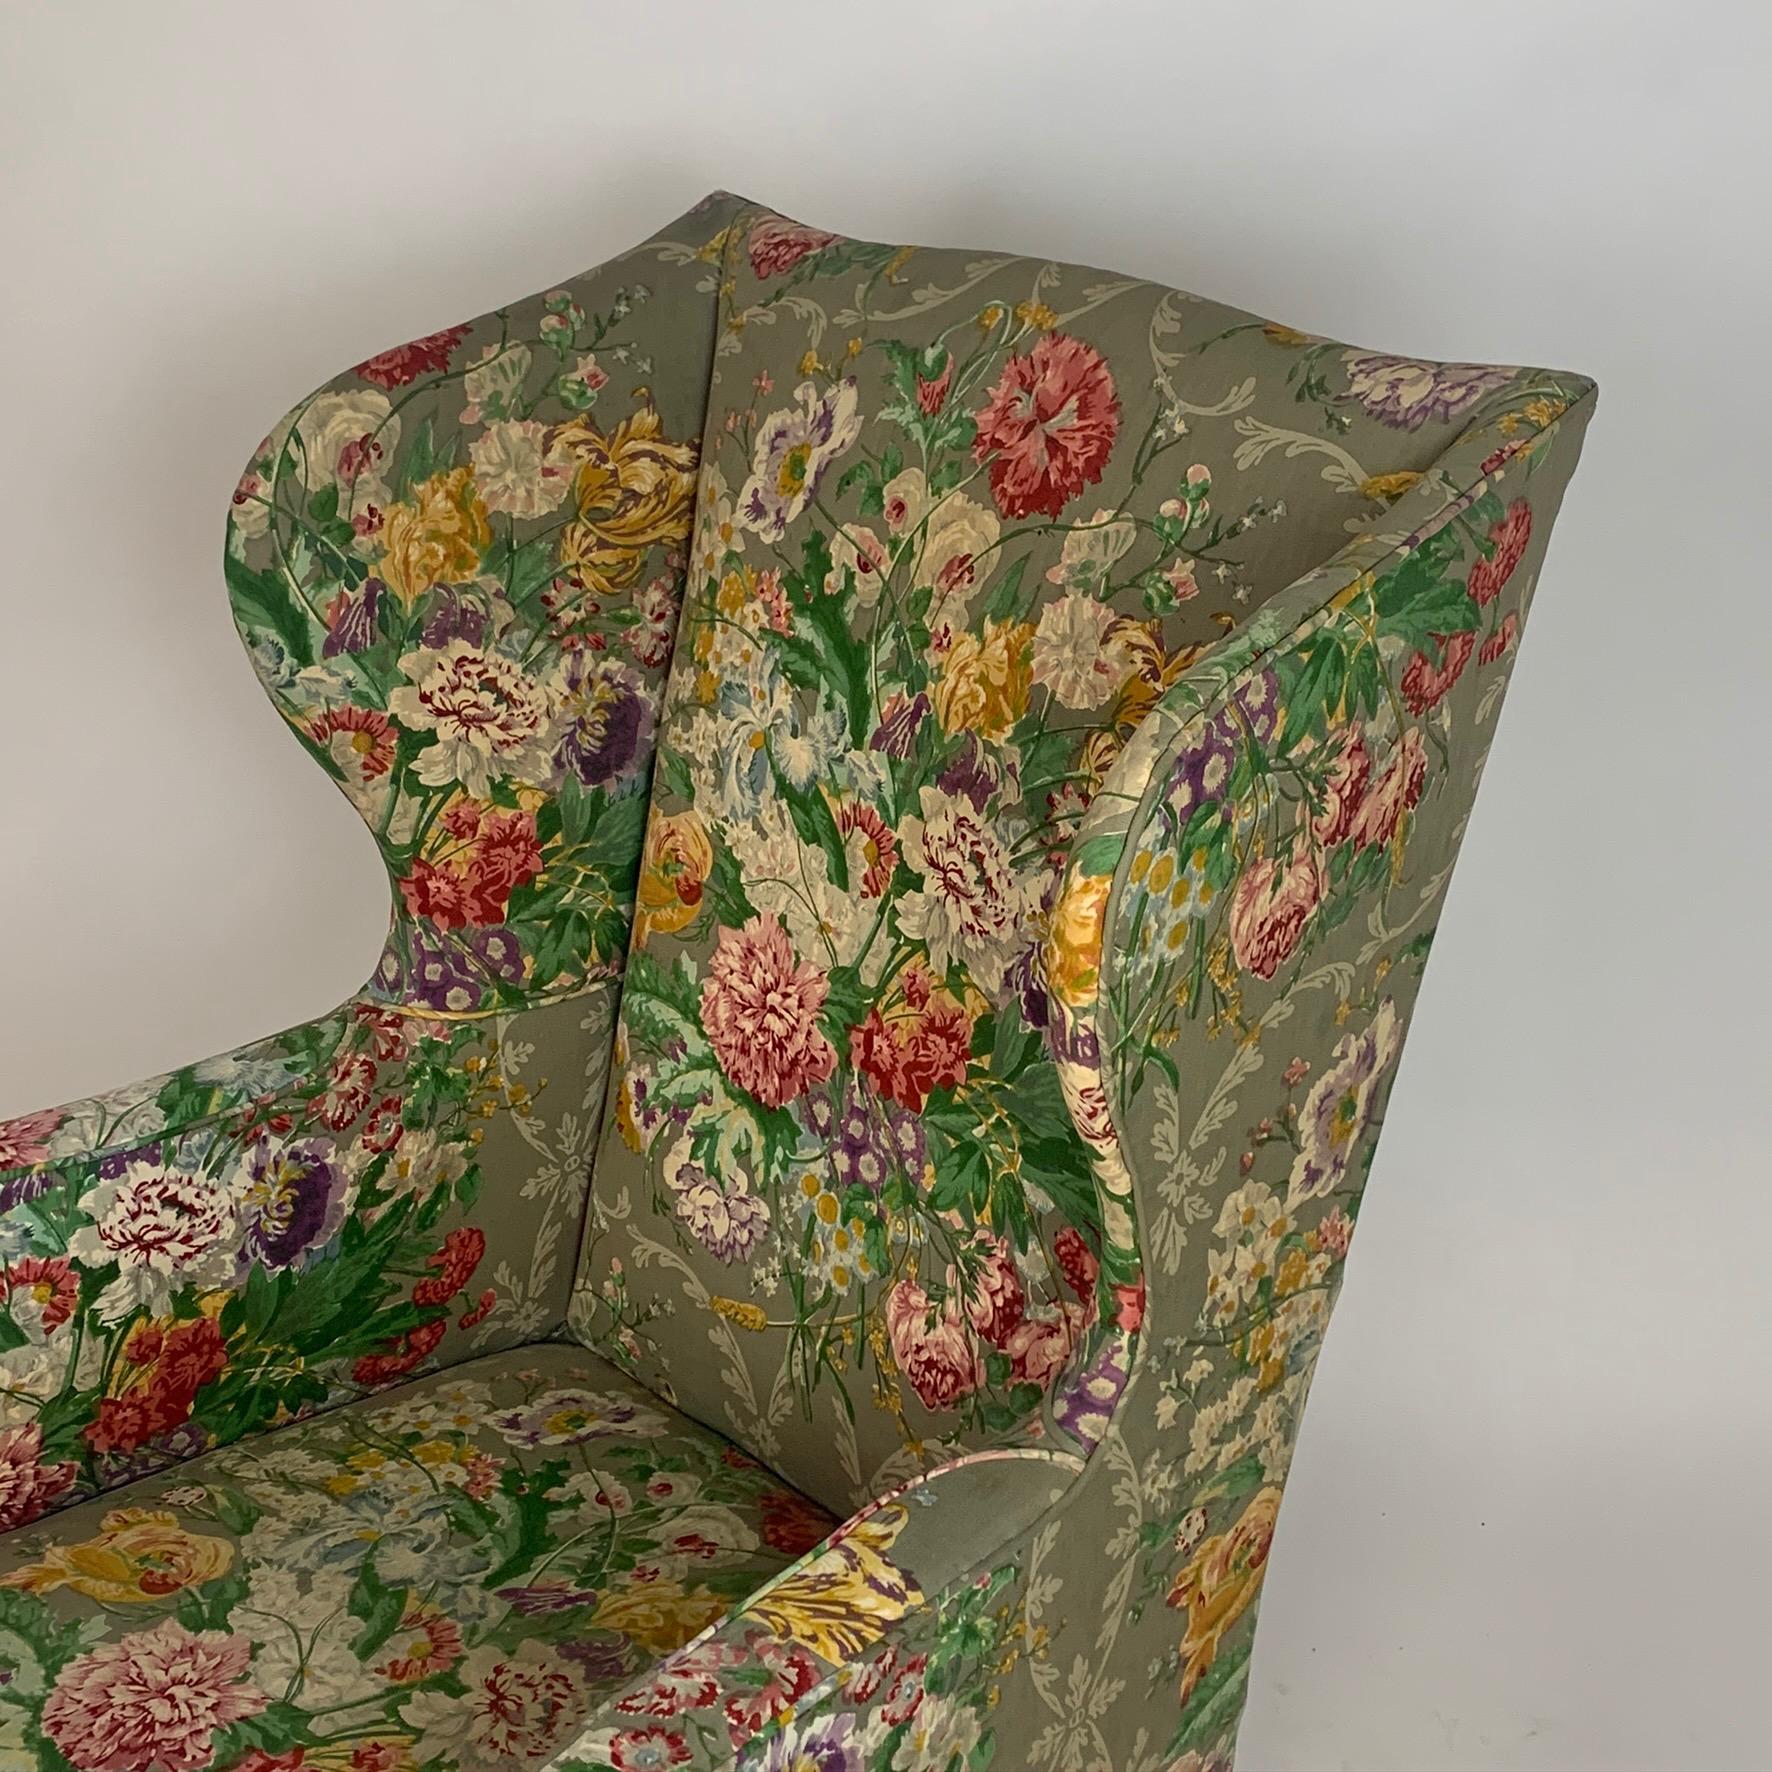 Exceptional Early American Wingback Chairs with Stunning Floral Upholstery 6